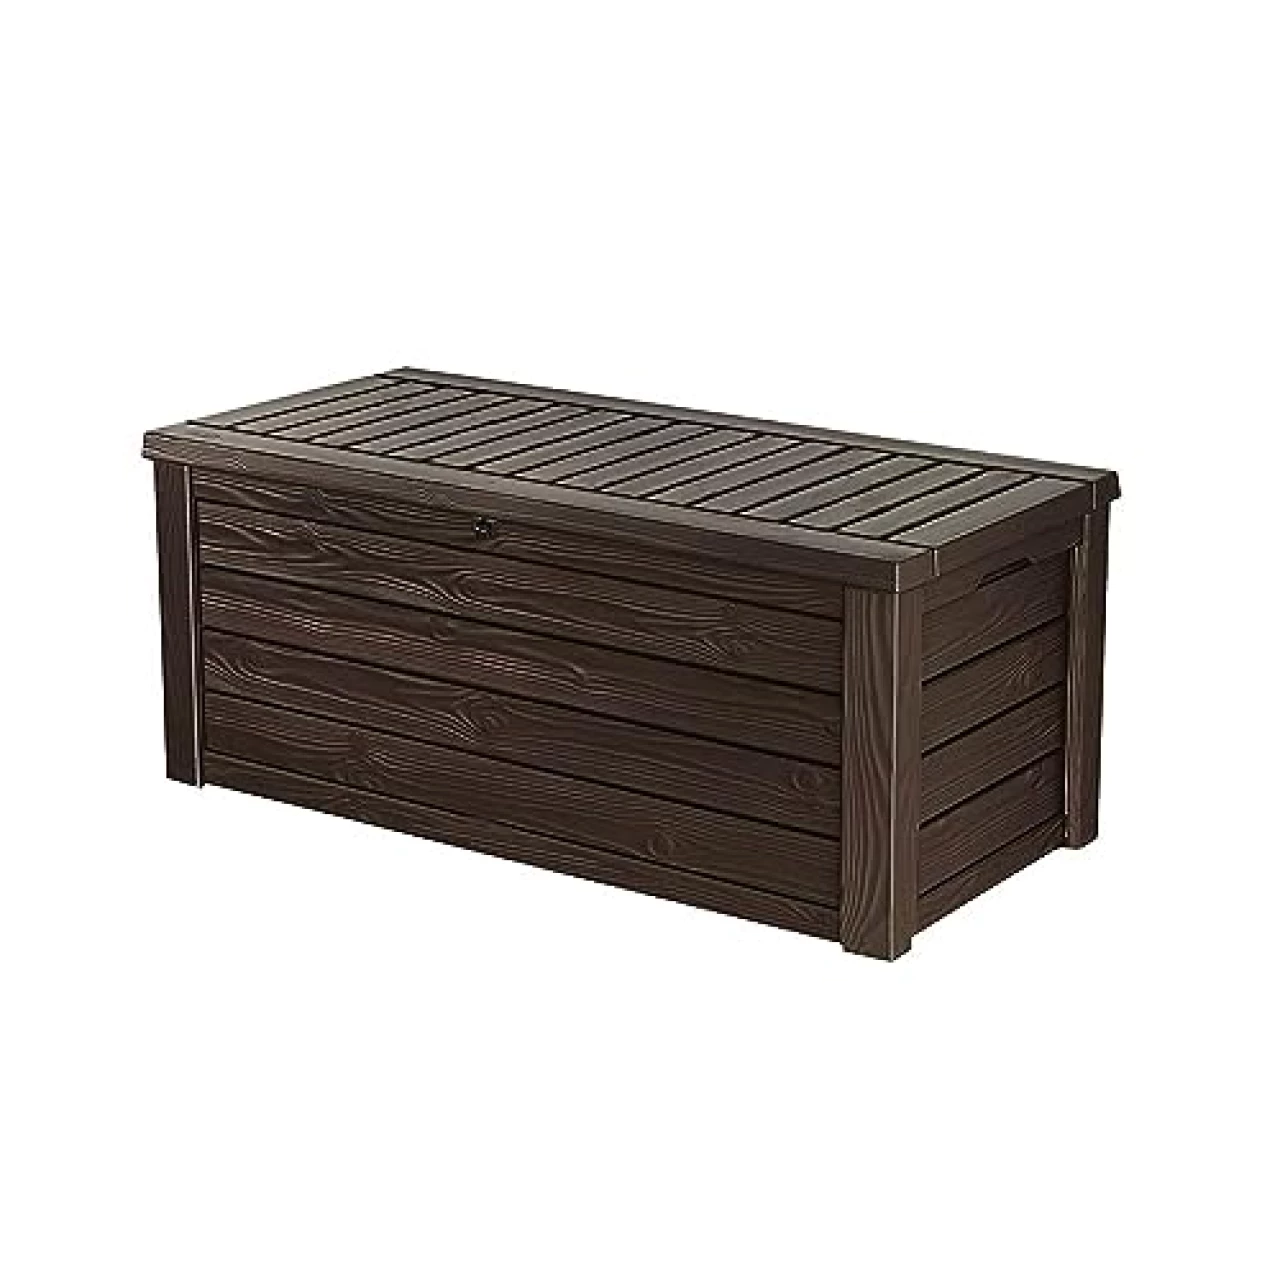 Keter Westwood Outdoor Resin Deck Storage Box Bin Organizer for Patio Furniture, Pool Toys, and Yard Tools with Natural Design, 150 Gallon, Espresso